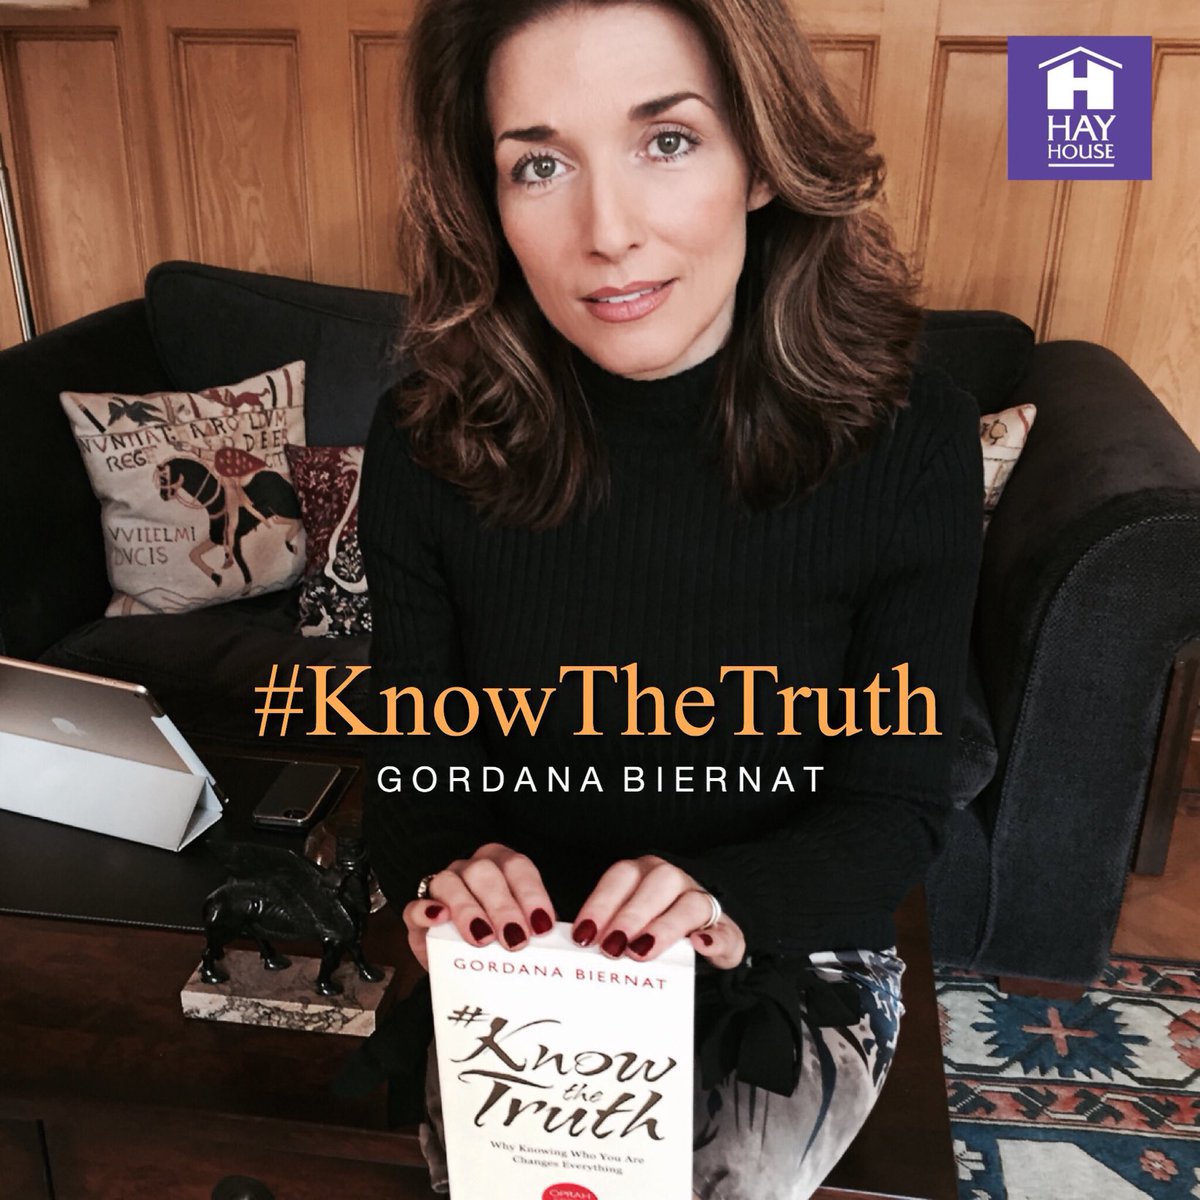 For no other reason than love... Sharing my truths with you, my beloved readers, brings me joy and happiness in abundance!💕 Thank you for allowing my thoughts into your reality. #Love❤️ @HayHouseUK My book #KnowTheTruth at Amazon: goo.gl/UCYAR4 #WorldBookDay 📚